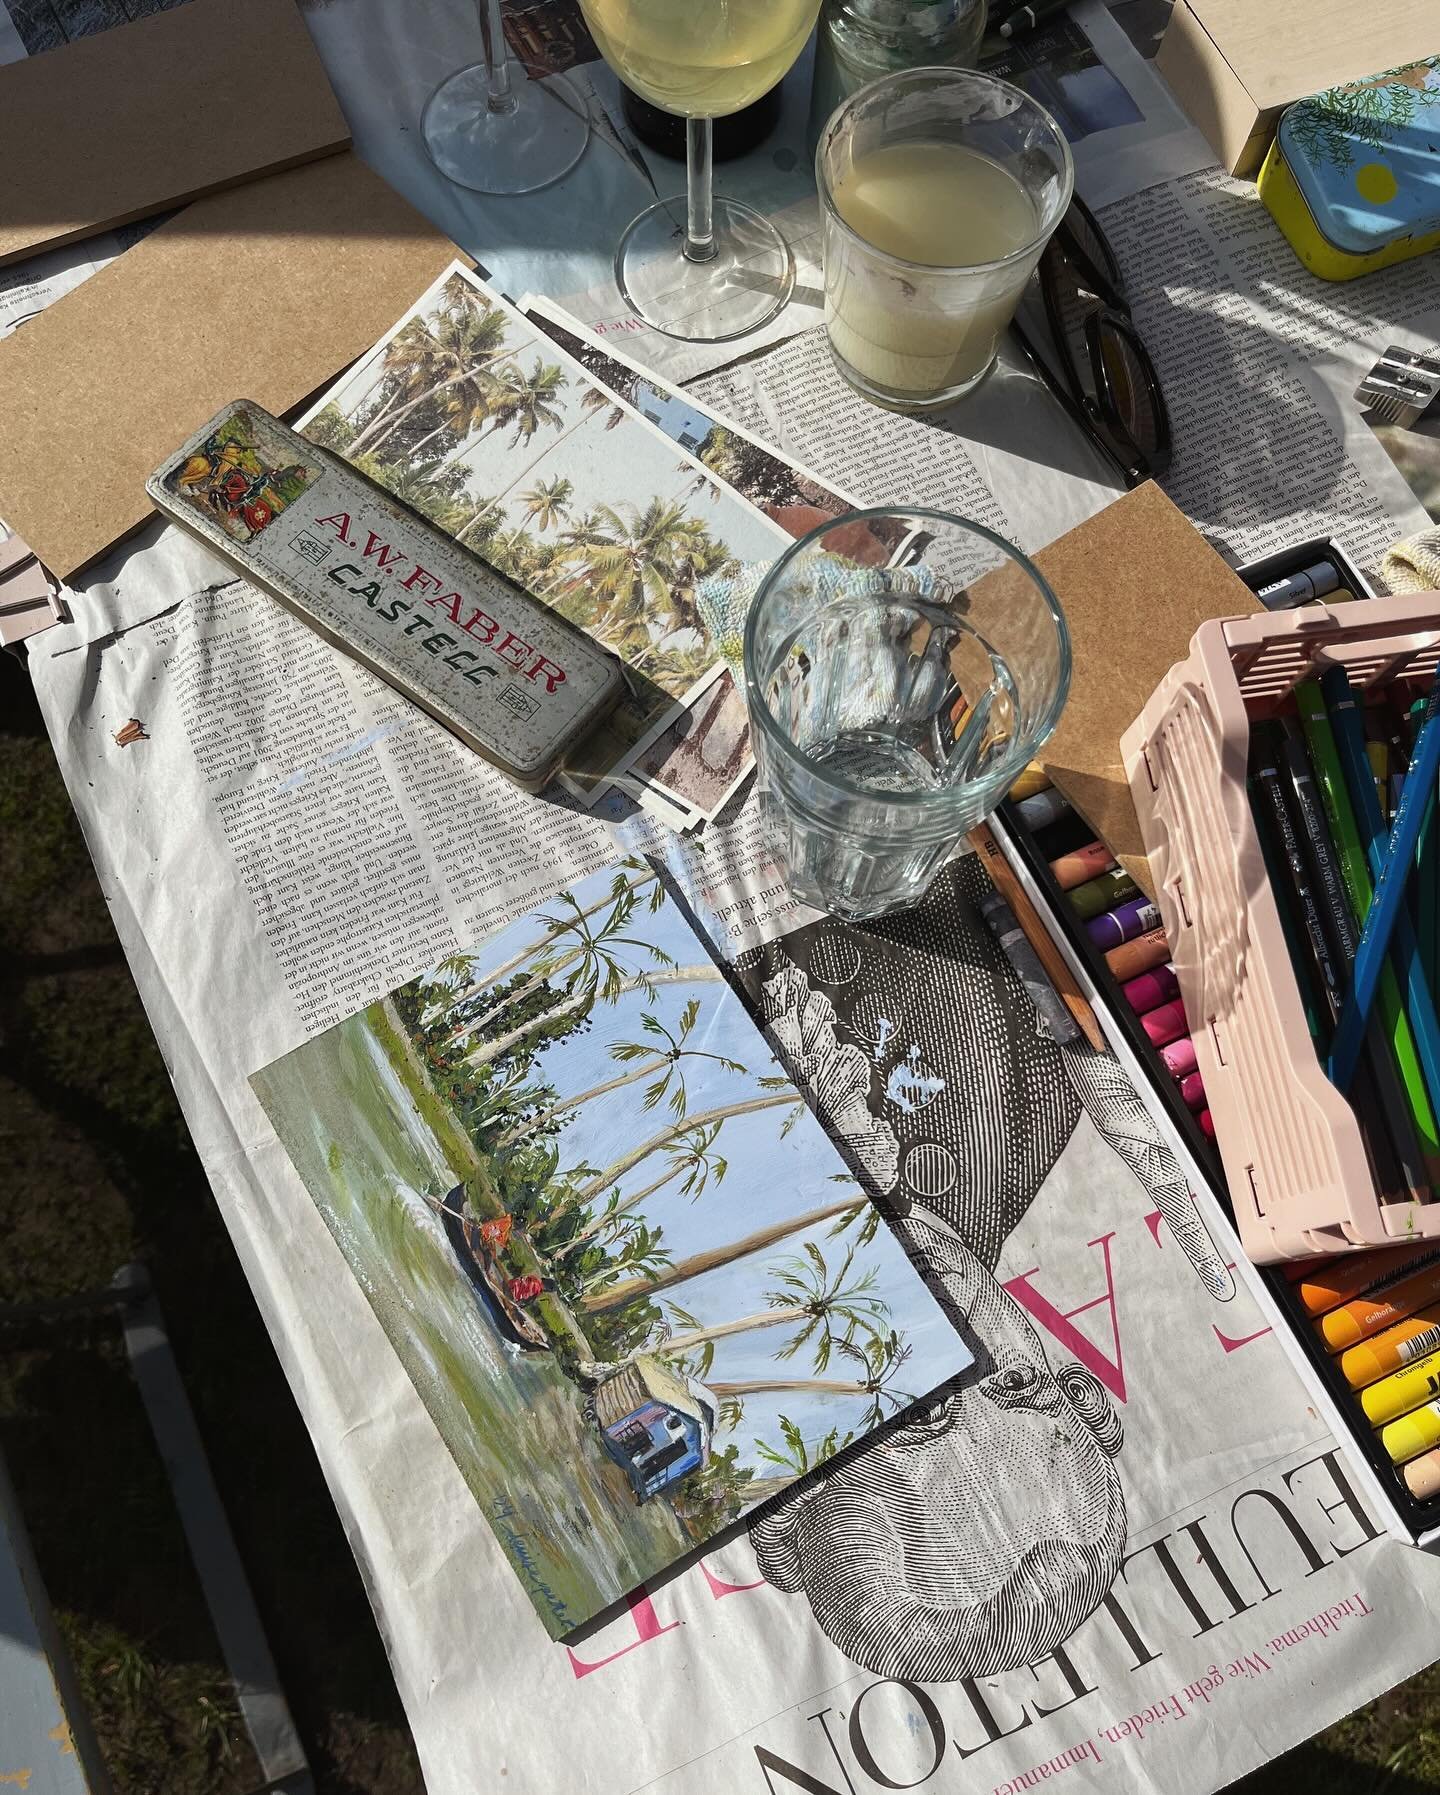 I hosted a little painting workshop this weekend at one of my closest friend&rsquo;s bachelorette party. We stayed at a beautiful farm house with chickens and a big yard and luckily the weather was so good we had the workshop outside in the sun. 
We 